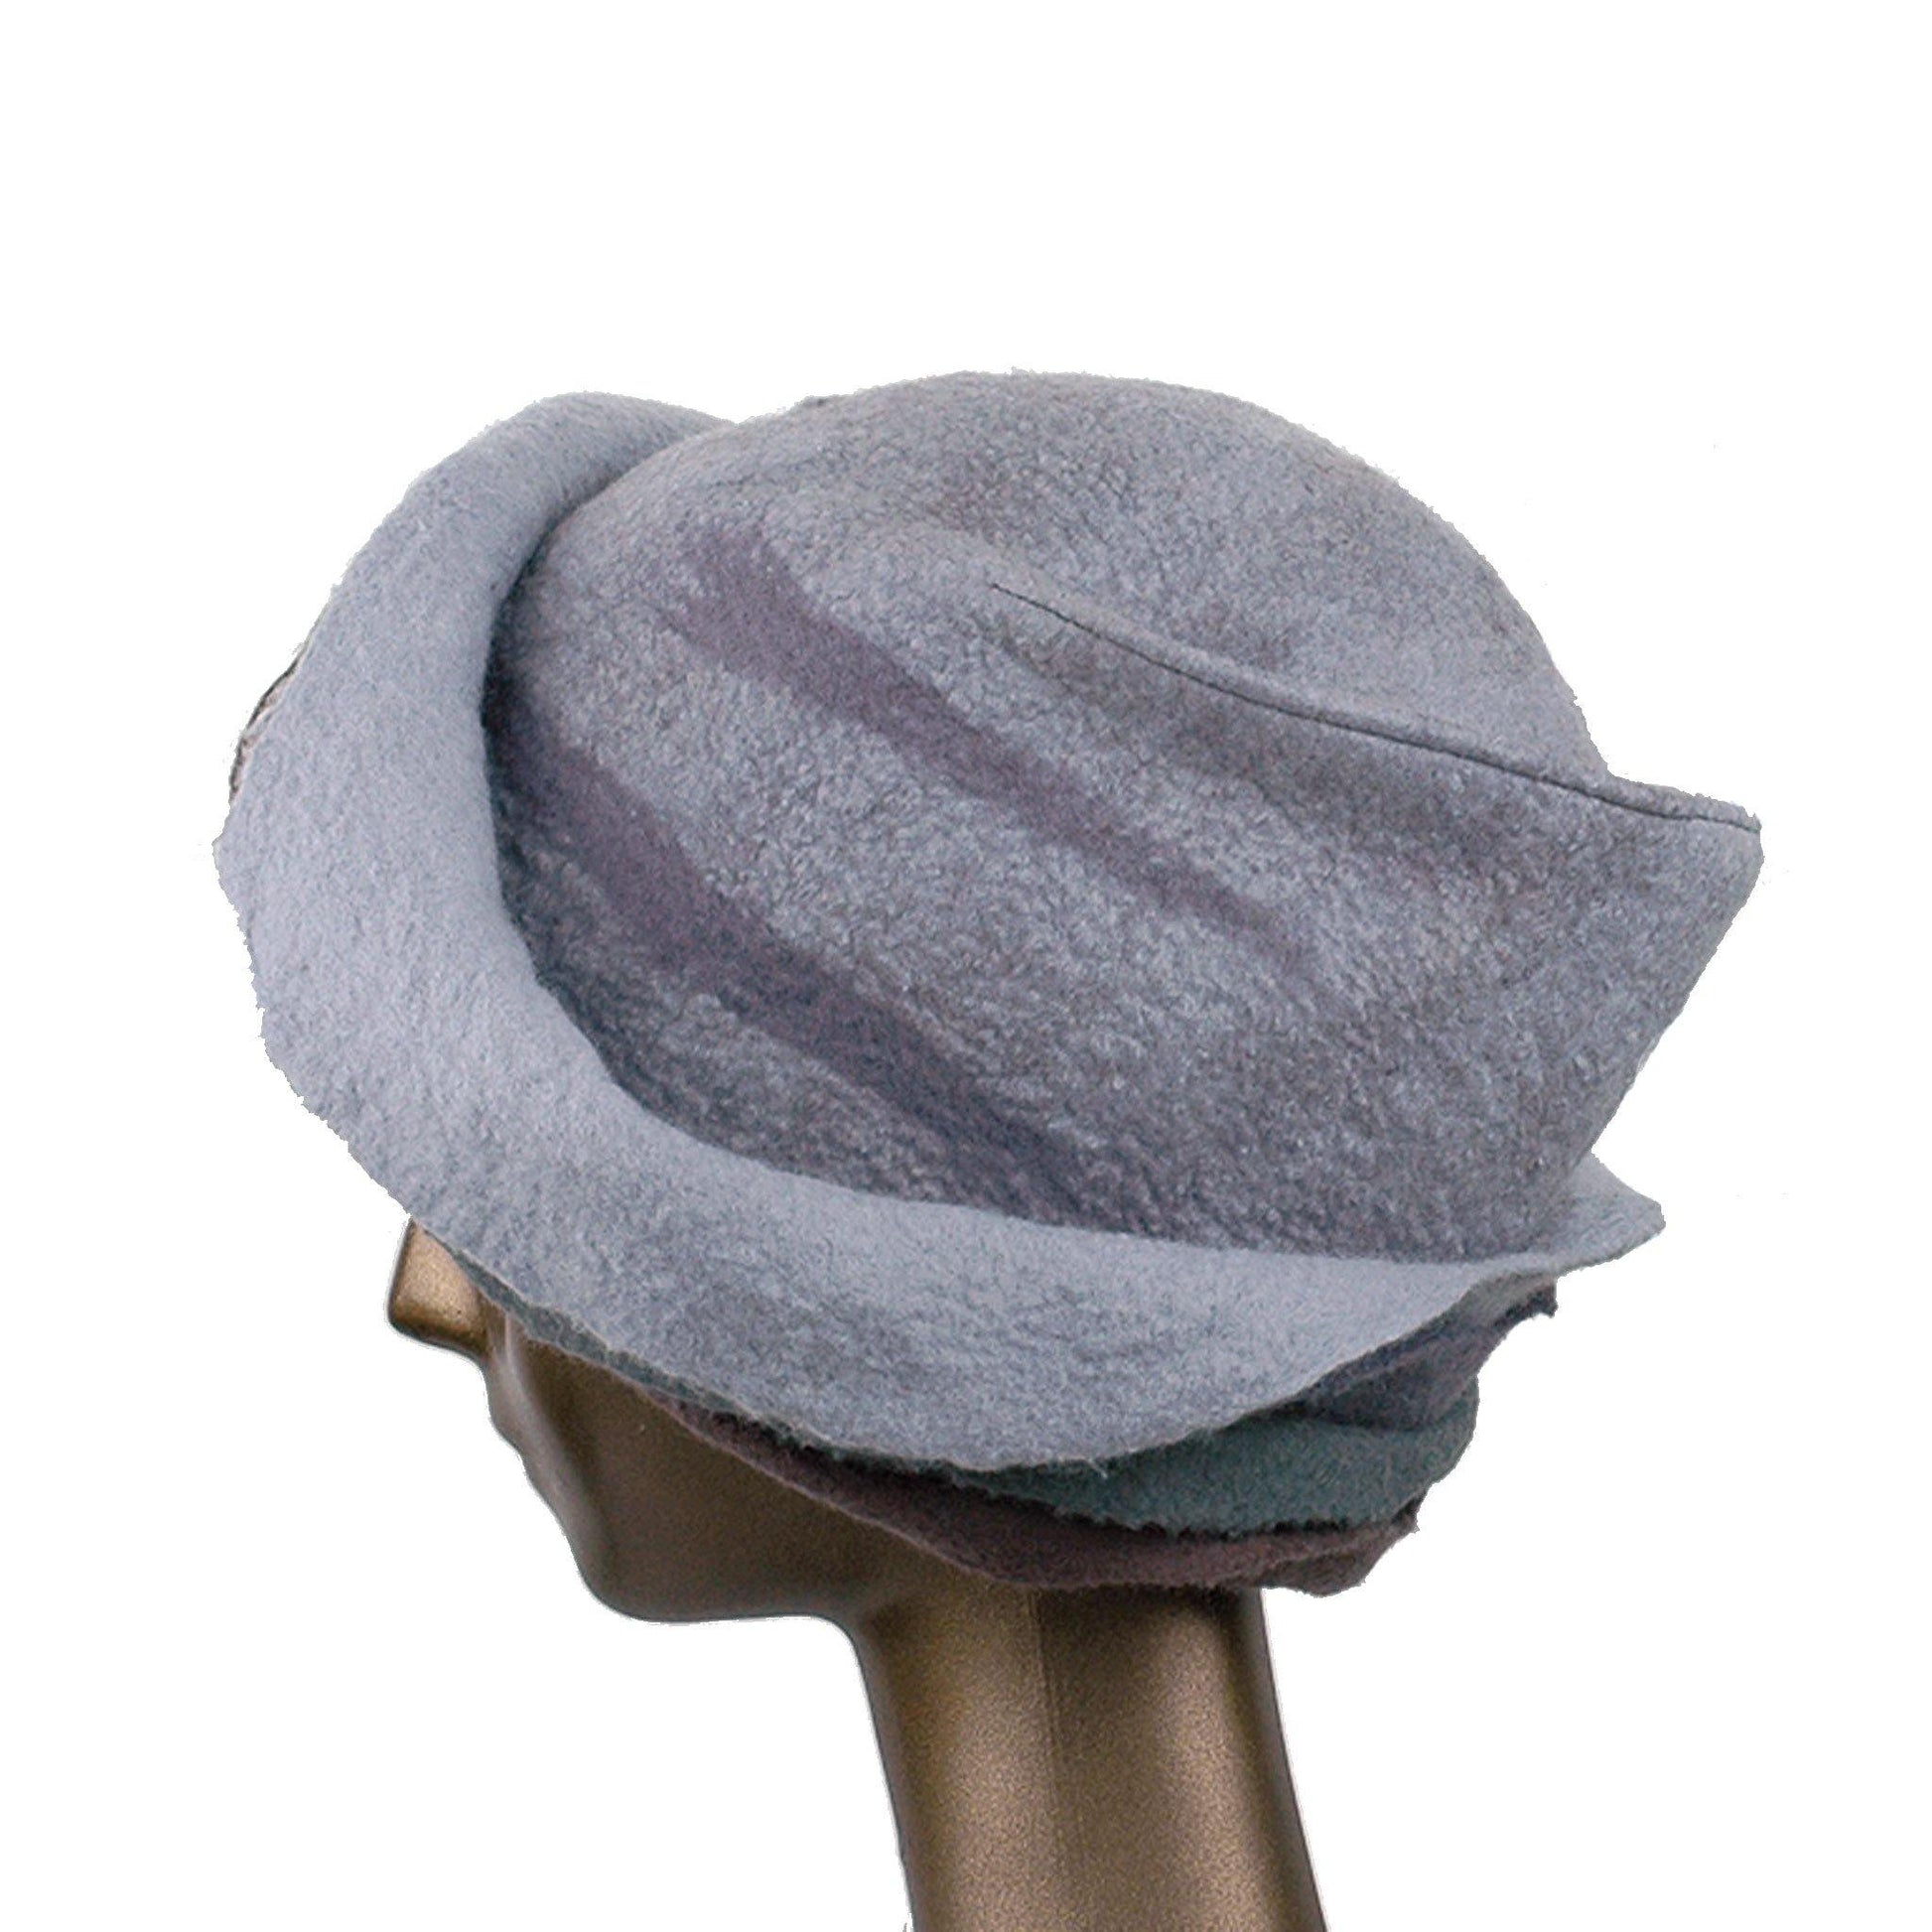 Gray Felted Cloche with Seashell Layered Brim - side view